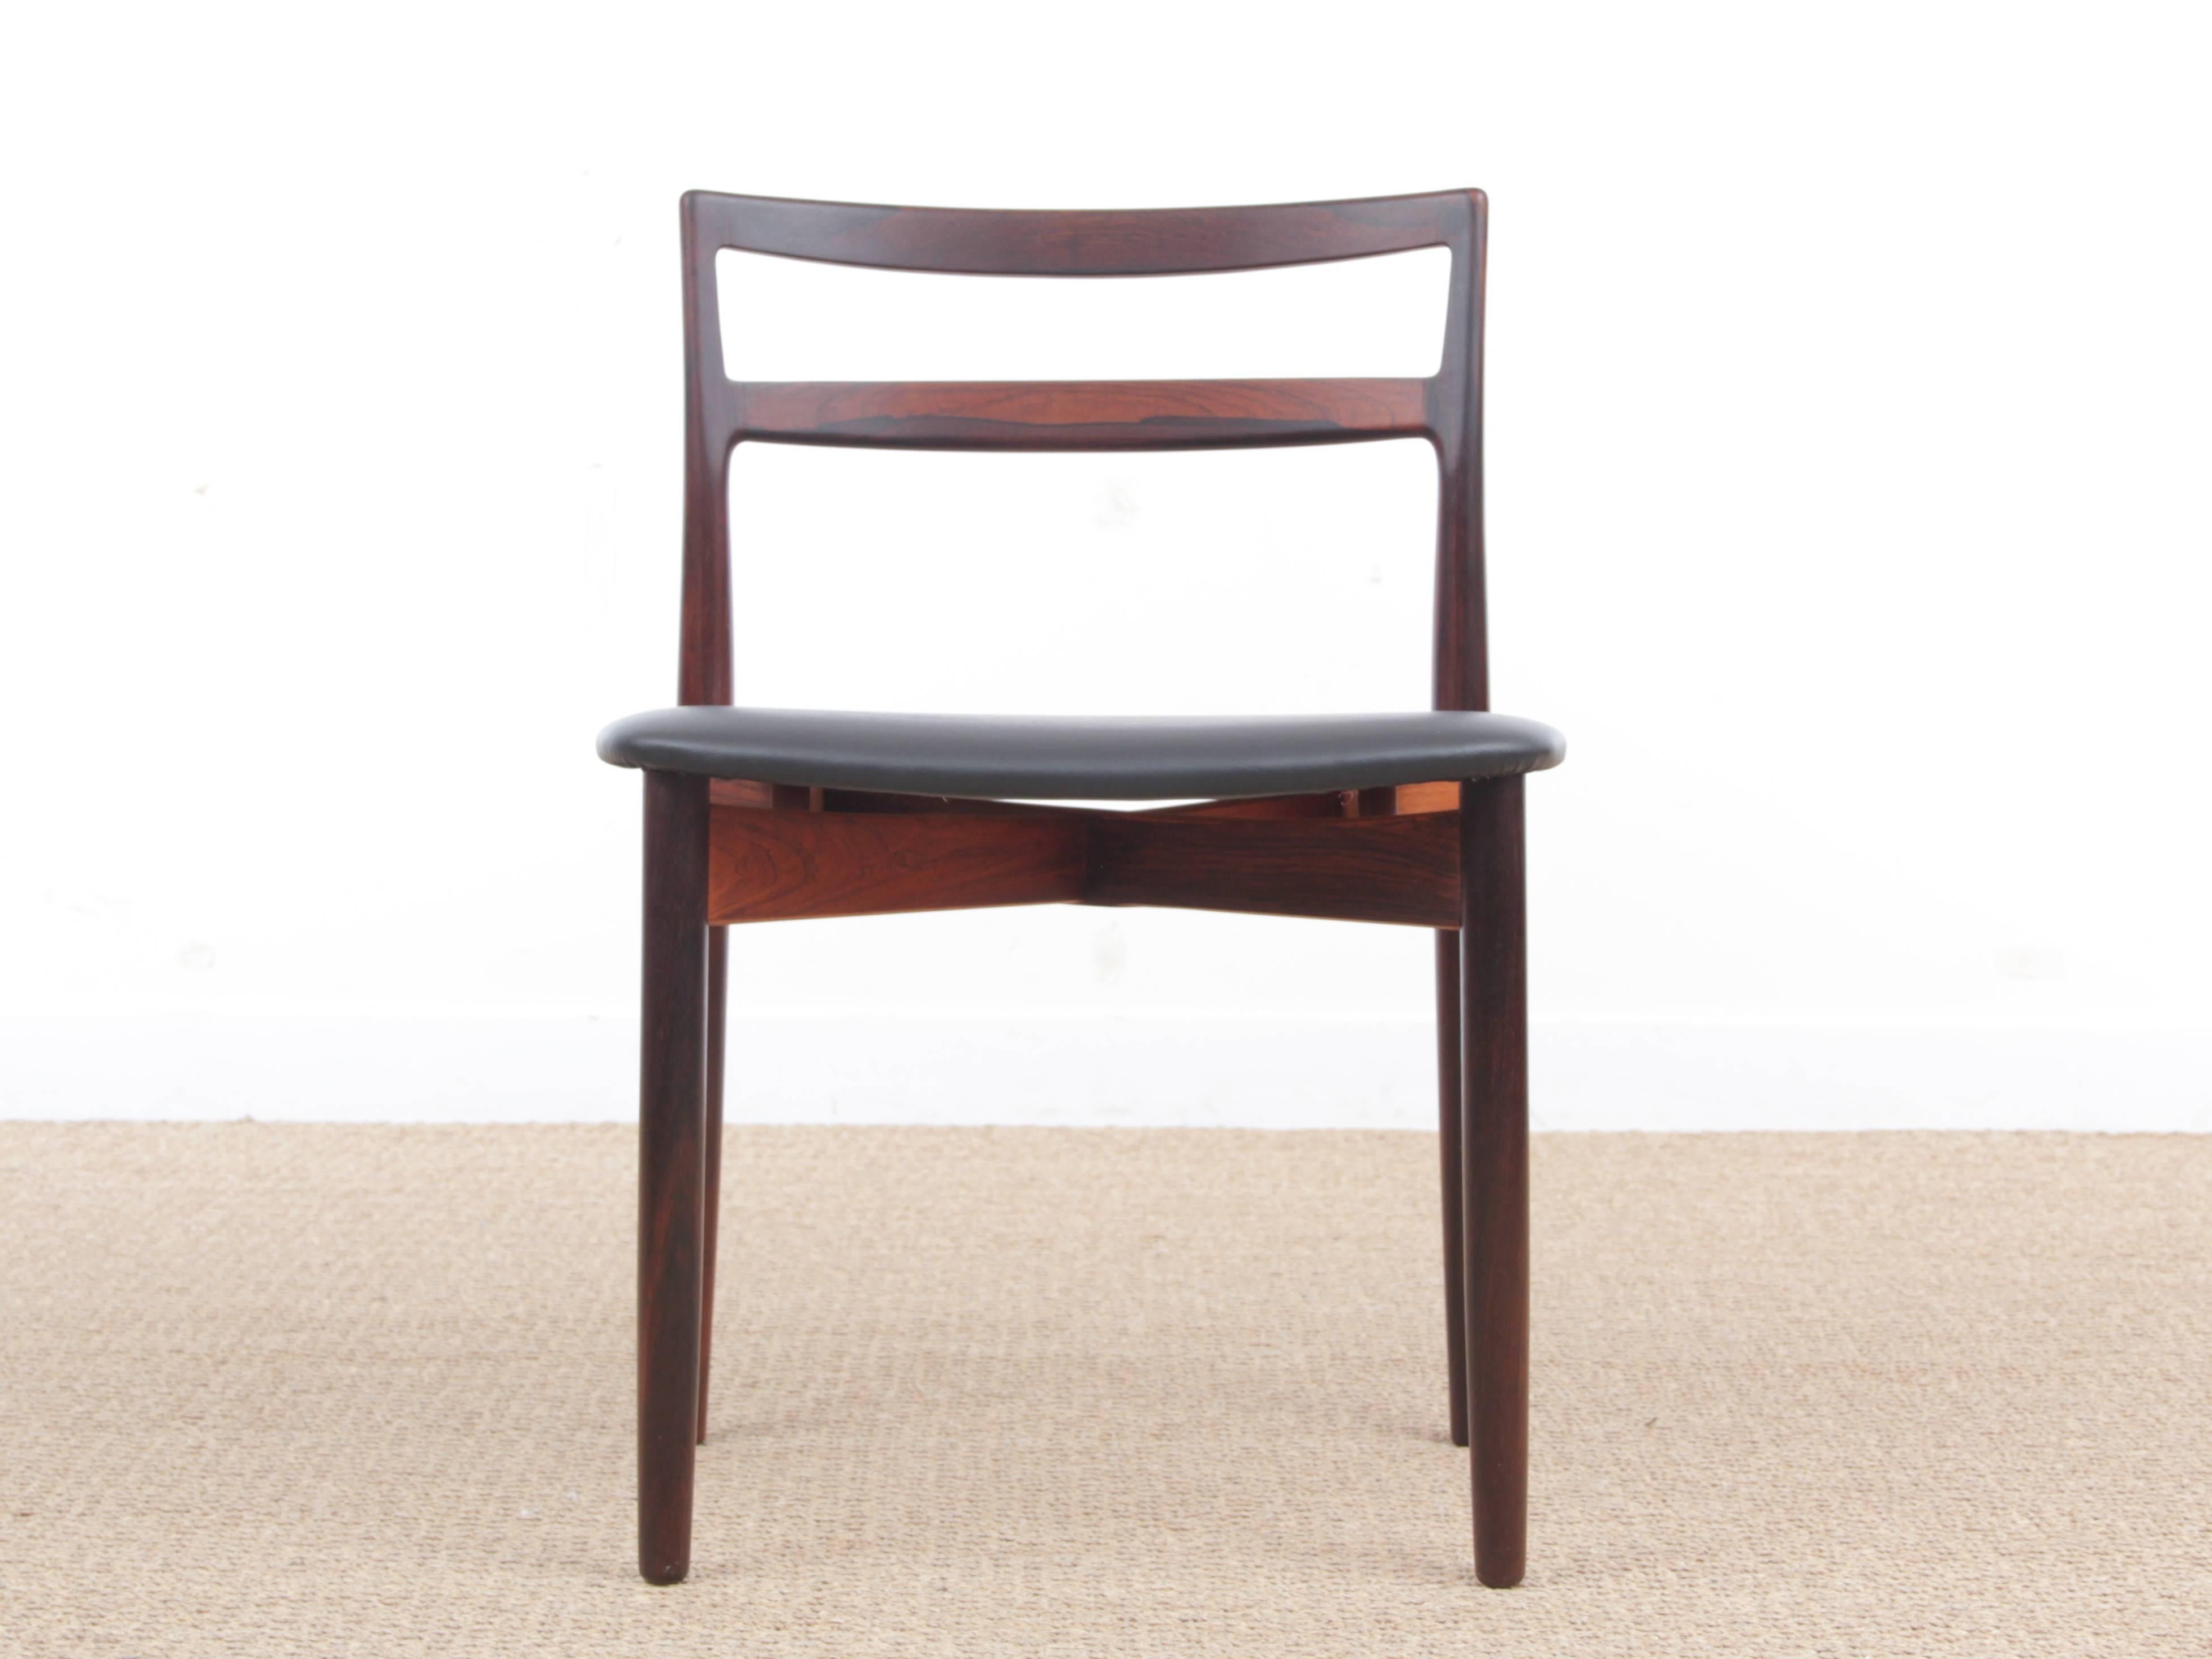 Mid-Century Modern Scandinavian set of six rosewood chairs model 61 by Harry Østergaard for Randers Møbelfabrik newly upholstered with similar black leather. Referenced by the Design Museum Denmark under number RP05862. Bibliography: Mobilia 1961.